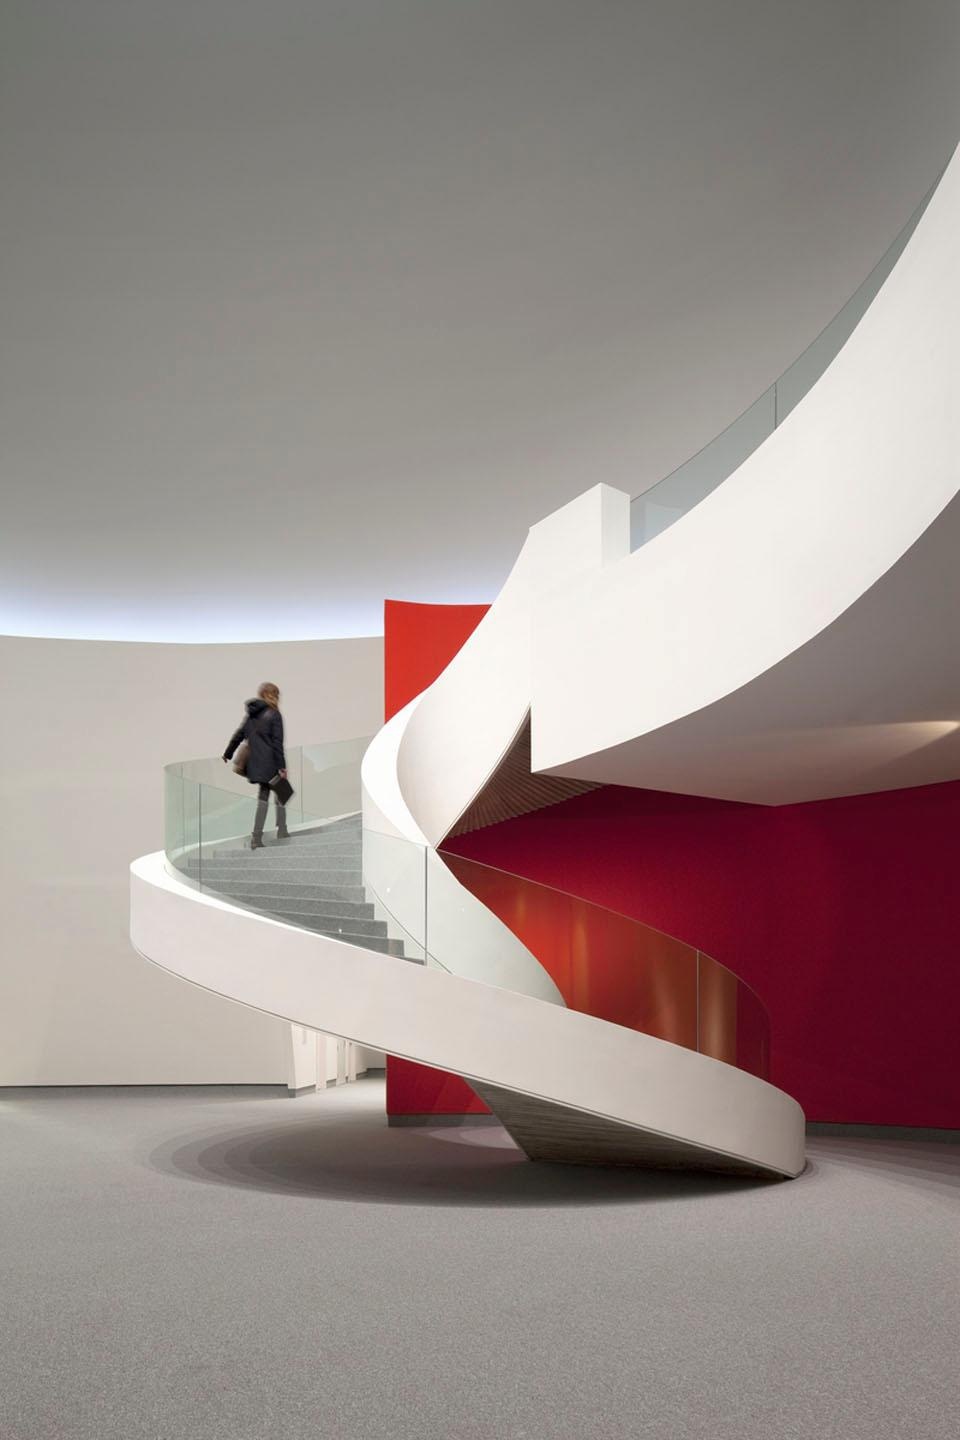 Archisearch - Inside the Museum, a spiraling staircase leads to a mezzanine experience of light and sound installations. The first exhibition opening March 25, La Luz, features the work of Spanish film director Carlo Saura. Photo: (c) James Ewing Photography